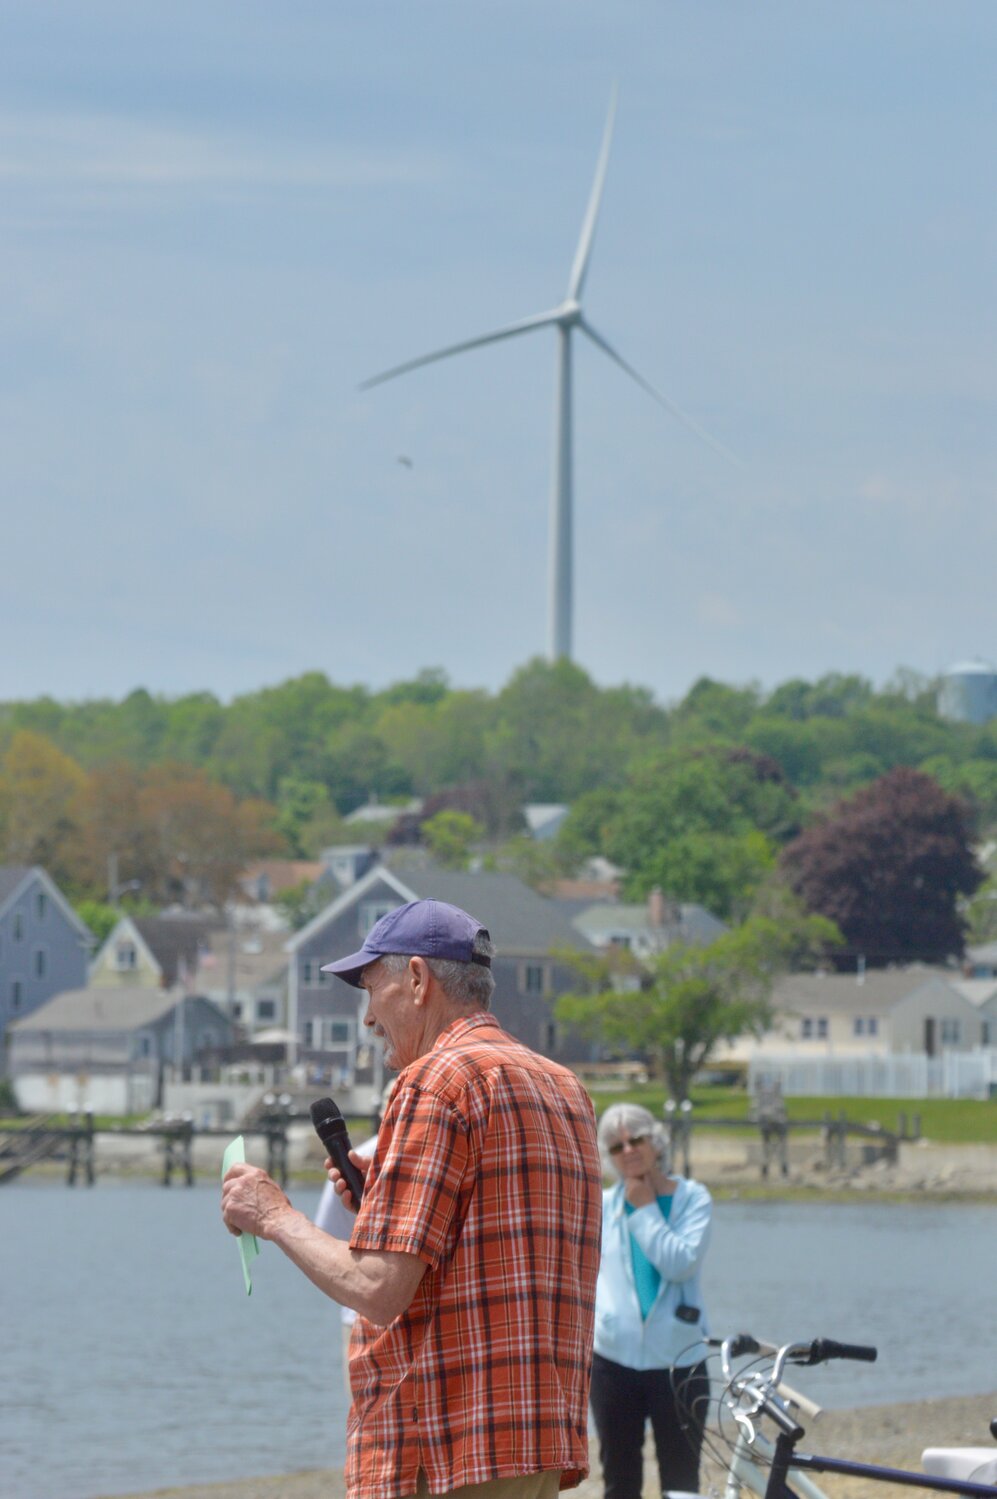 Frank Haggerty, of Jamestown, speaks to the crowd with the wind turbine at Portsmouth High School in the distance.